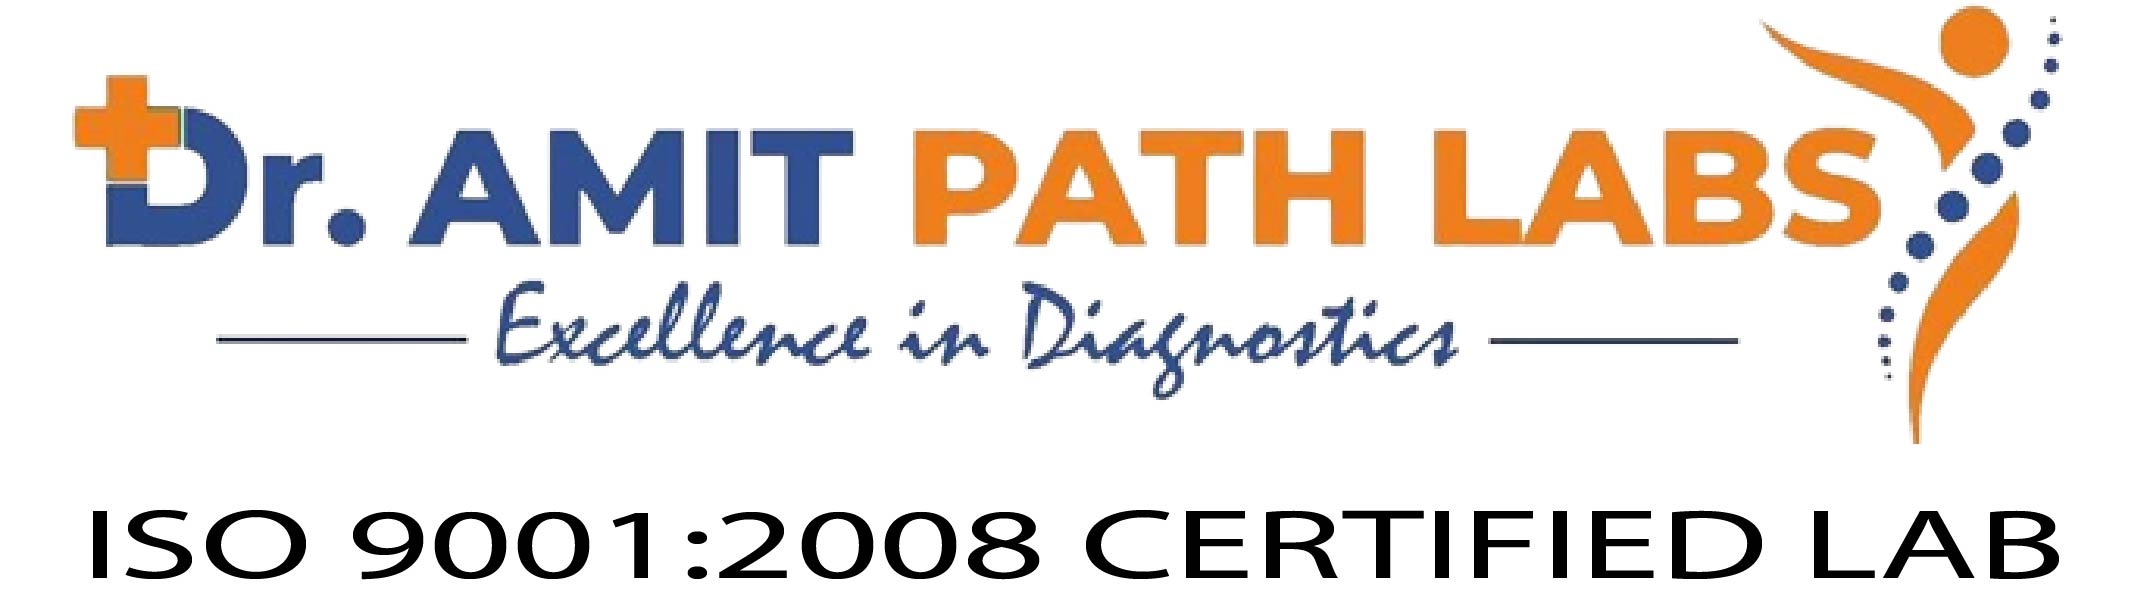 Dr Amit Path Labs logo.png